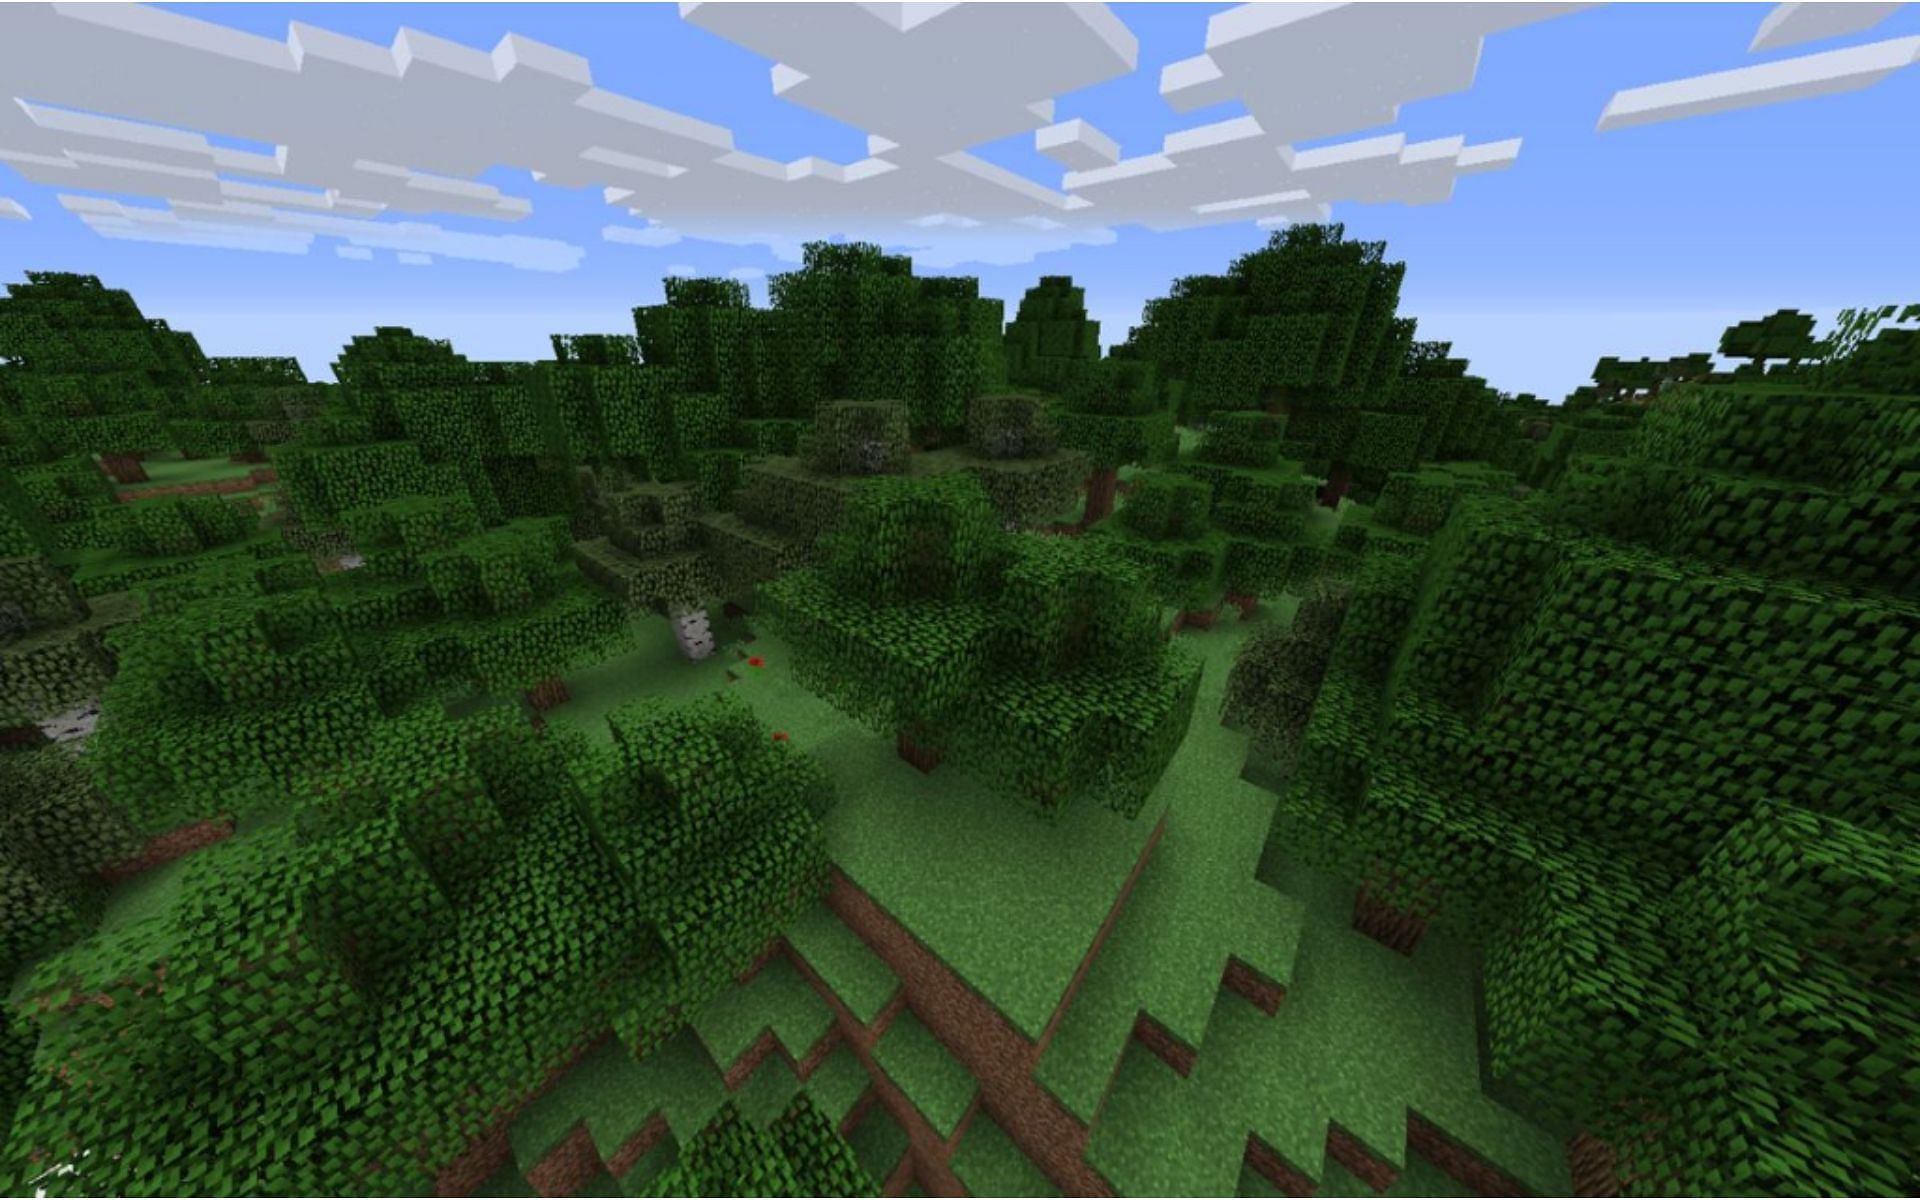 Scouting locations and finding the perfect one can make all the difference in a build (Image via Mojang)